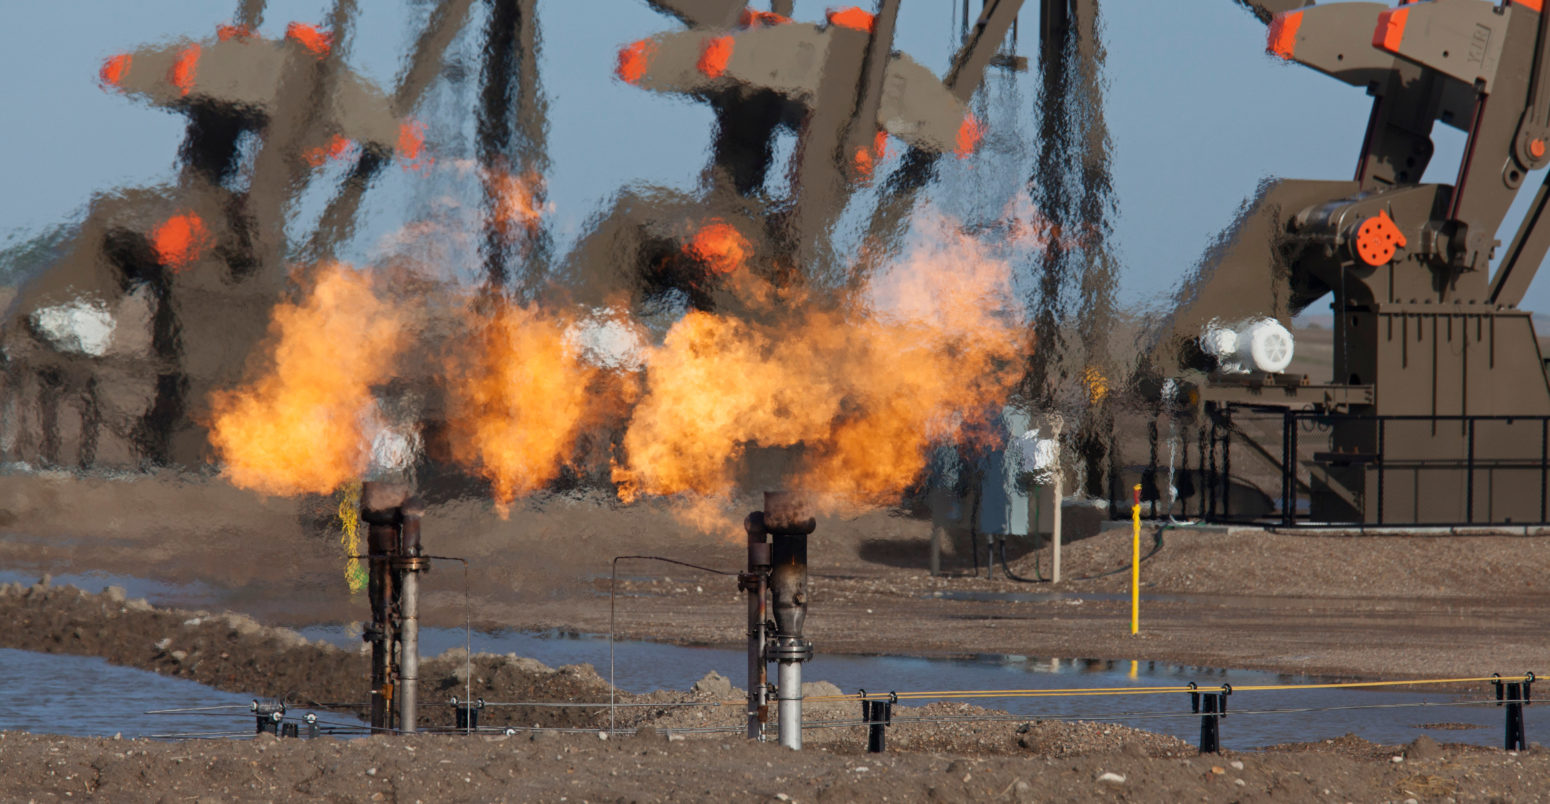 Natural gas is flared off as oil is pumped in the Bakken shale formation. Credit: Jim West / Alamy Stock Photo E1MT0N